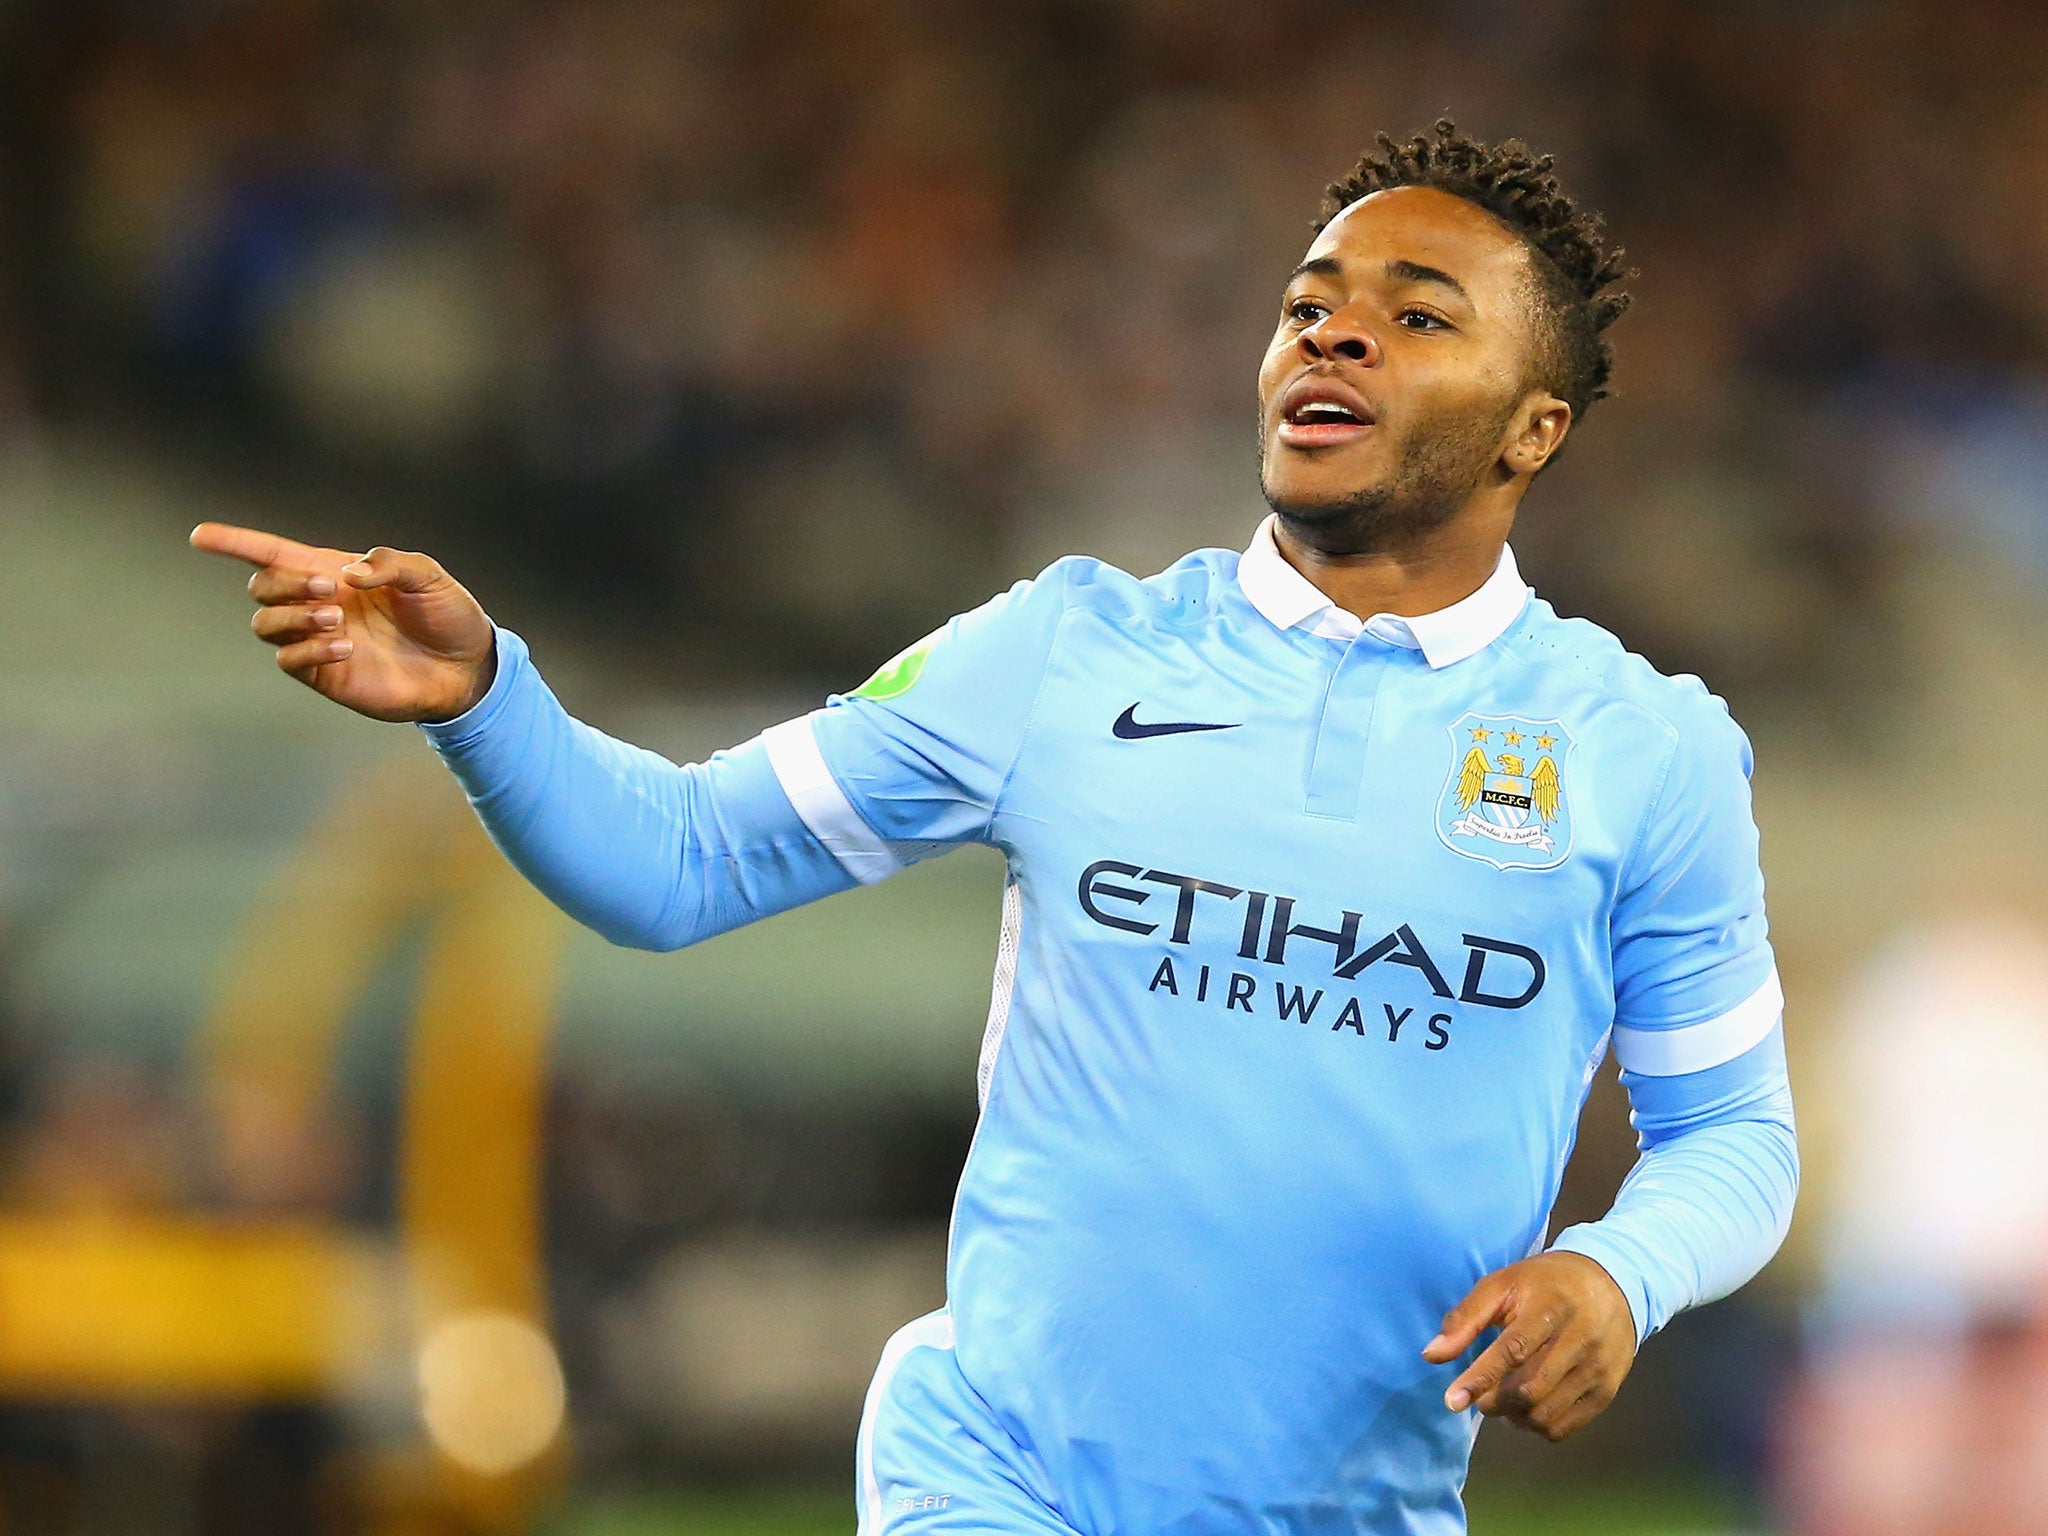 Raheem Sterling has already joined Manchester City this summer